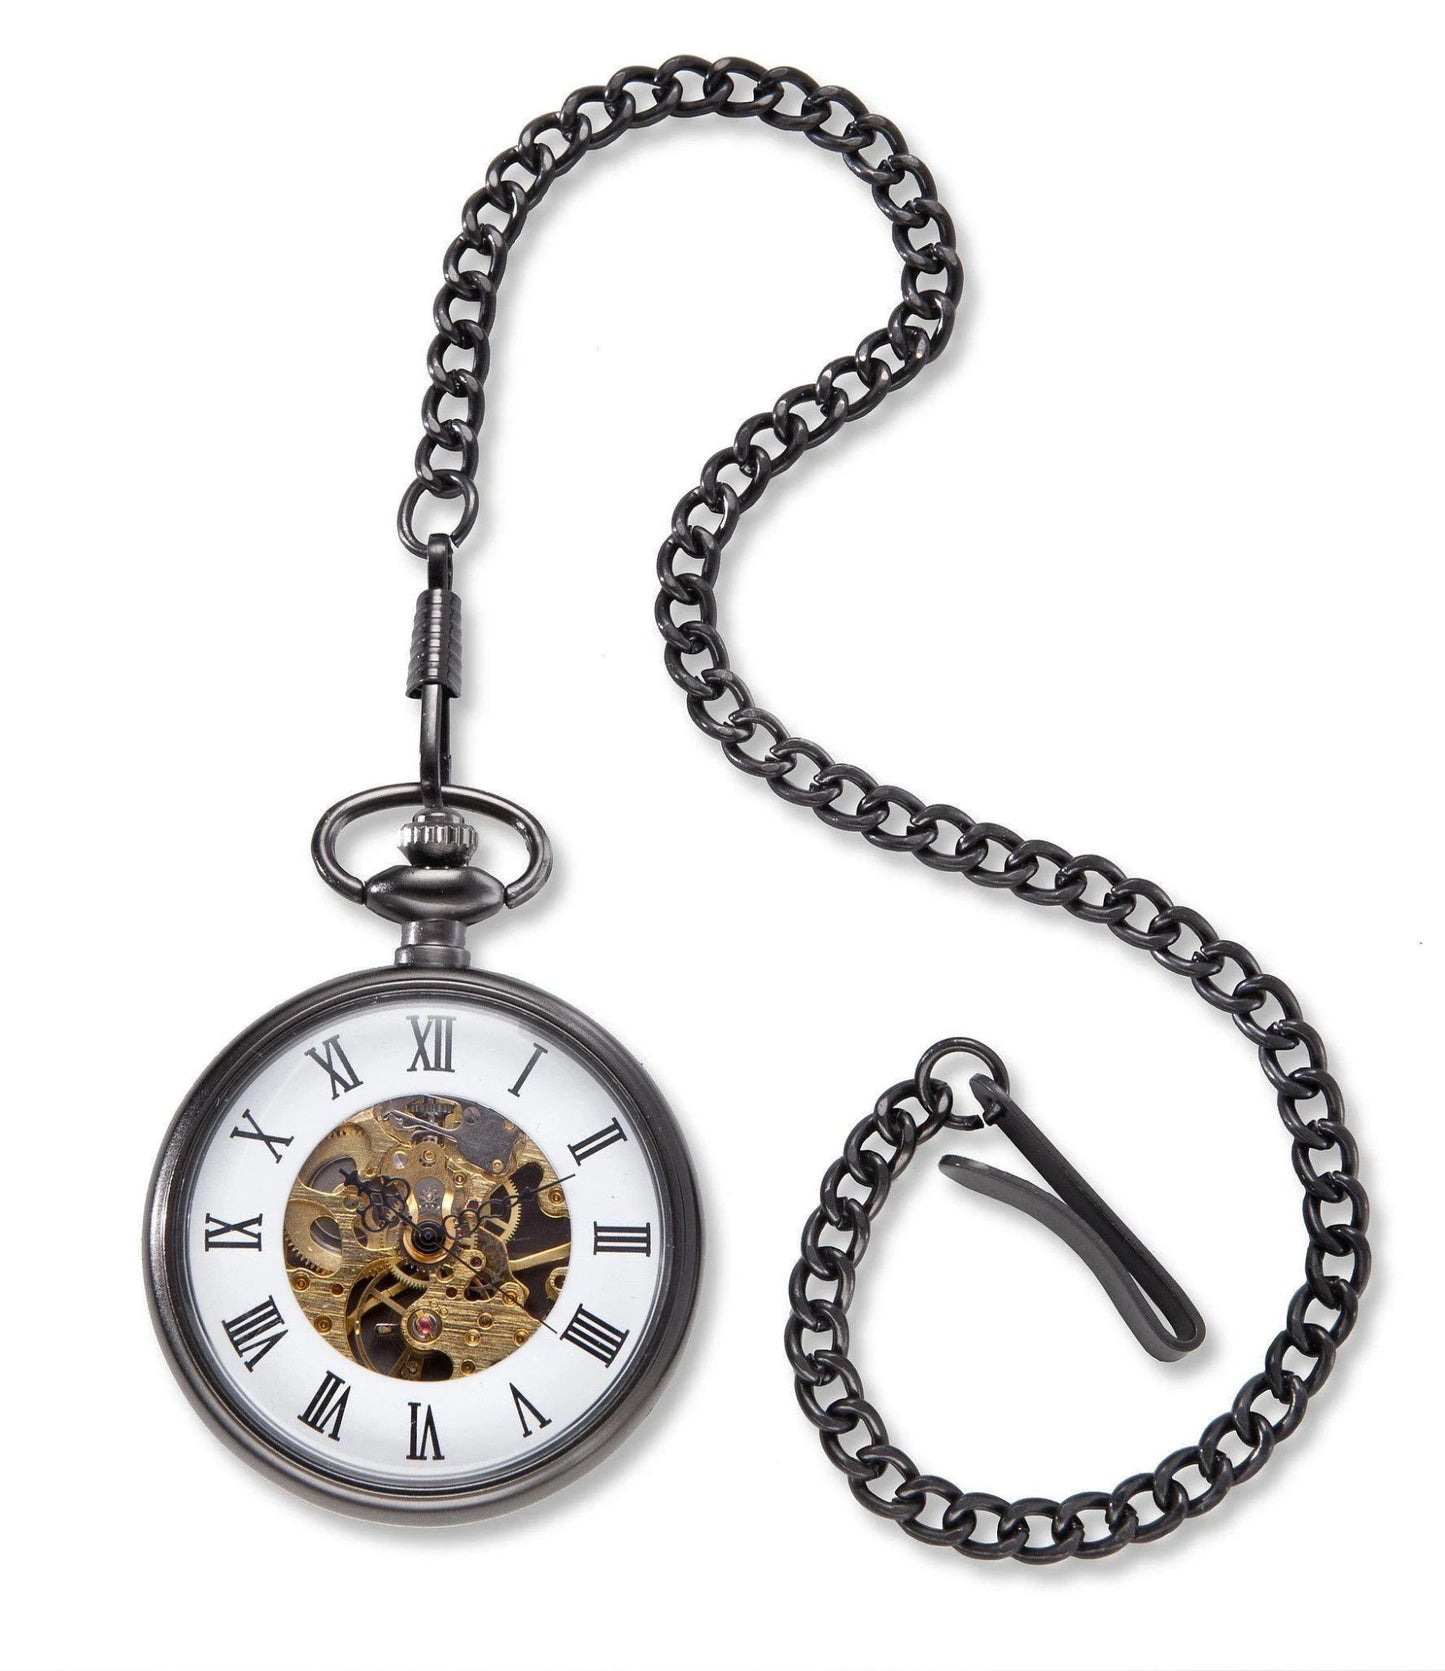 Personalized Open Face Pocket Watch - Crest Initial and Name